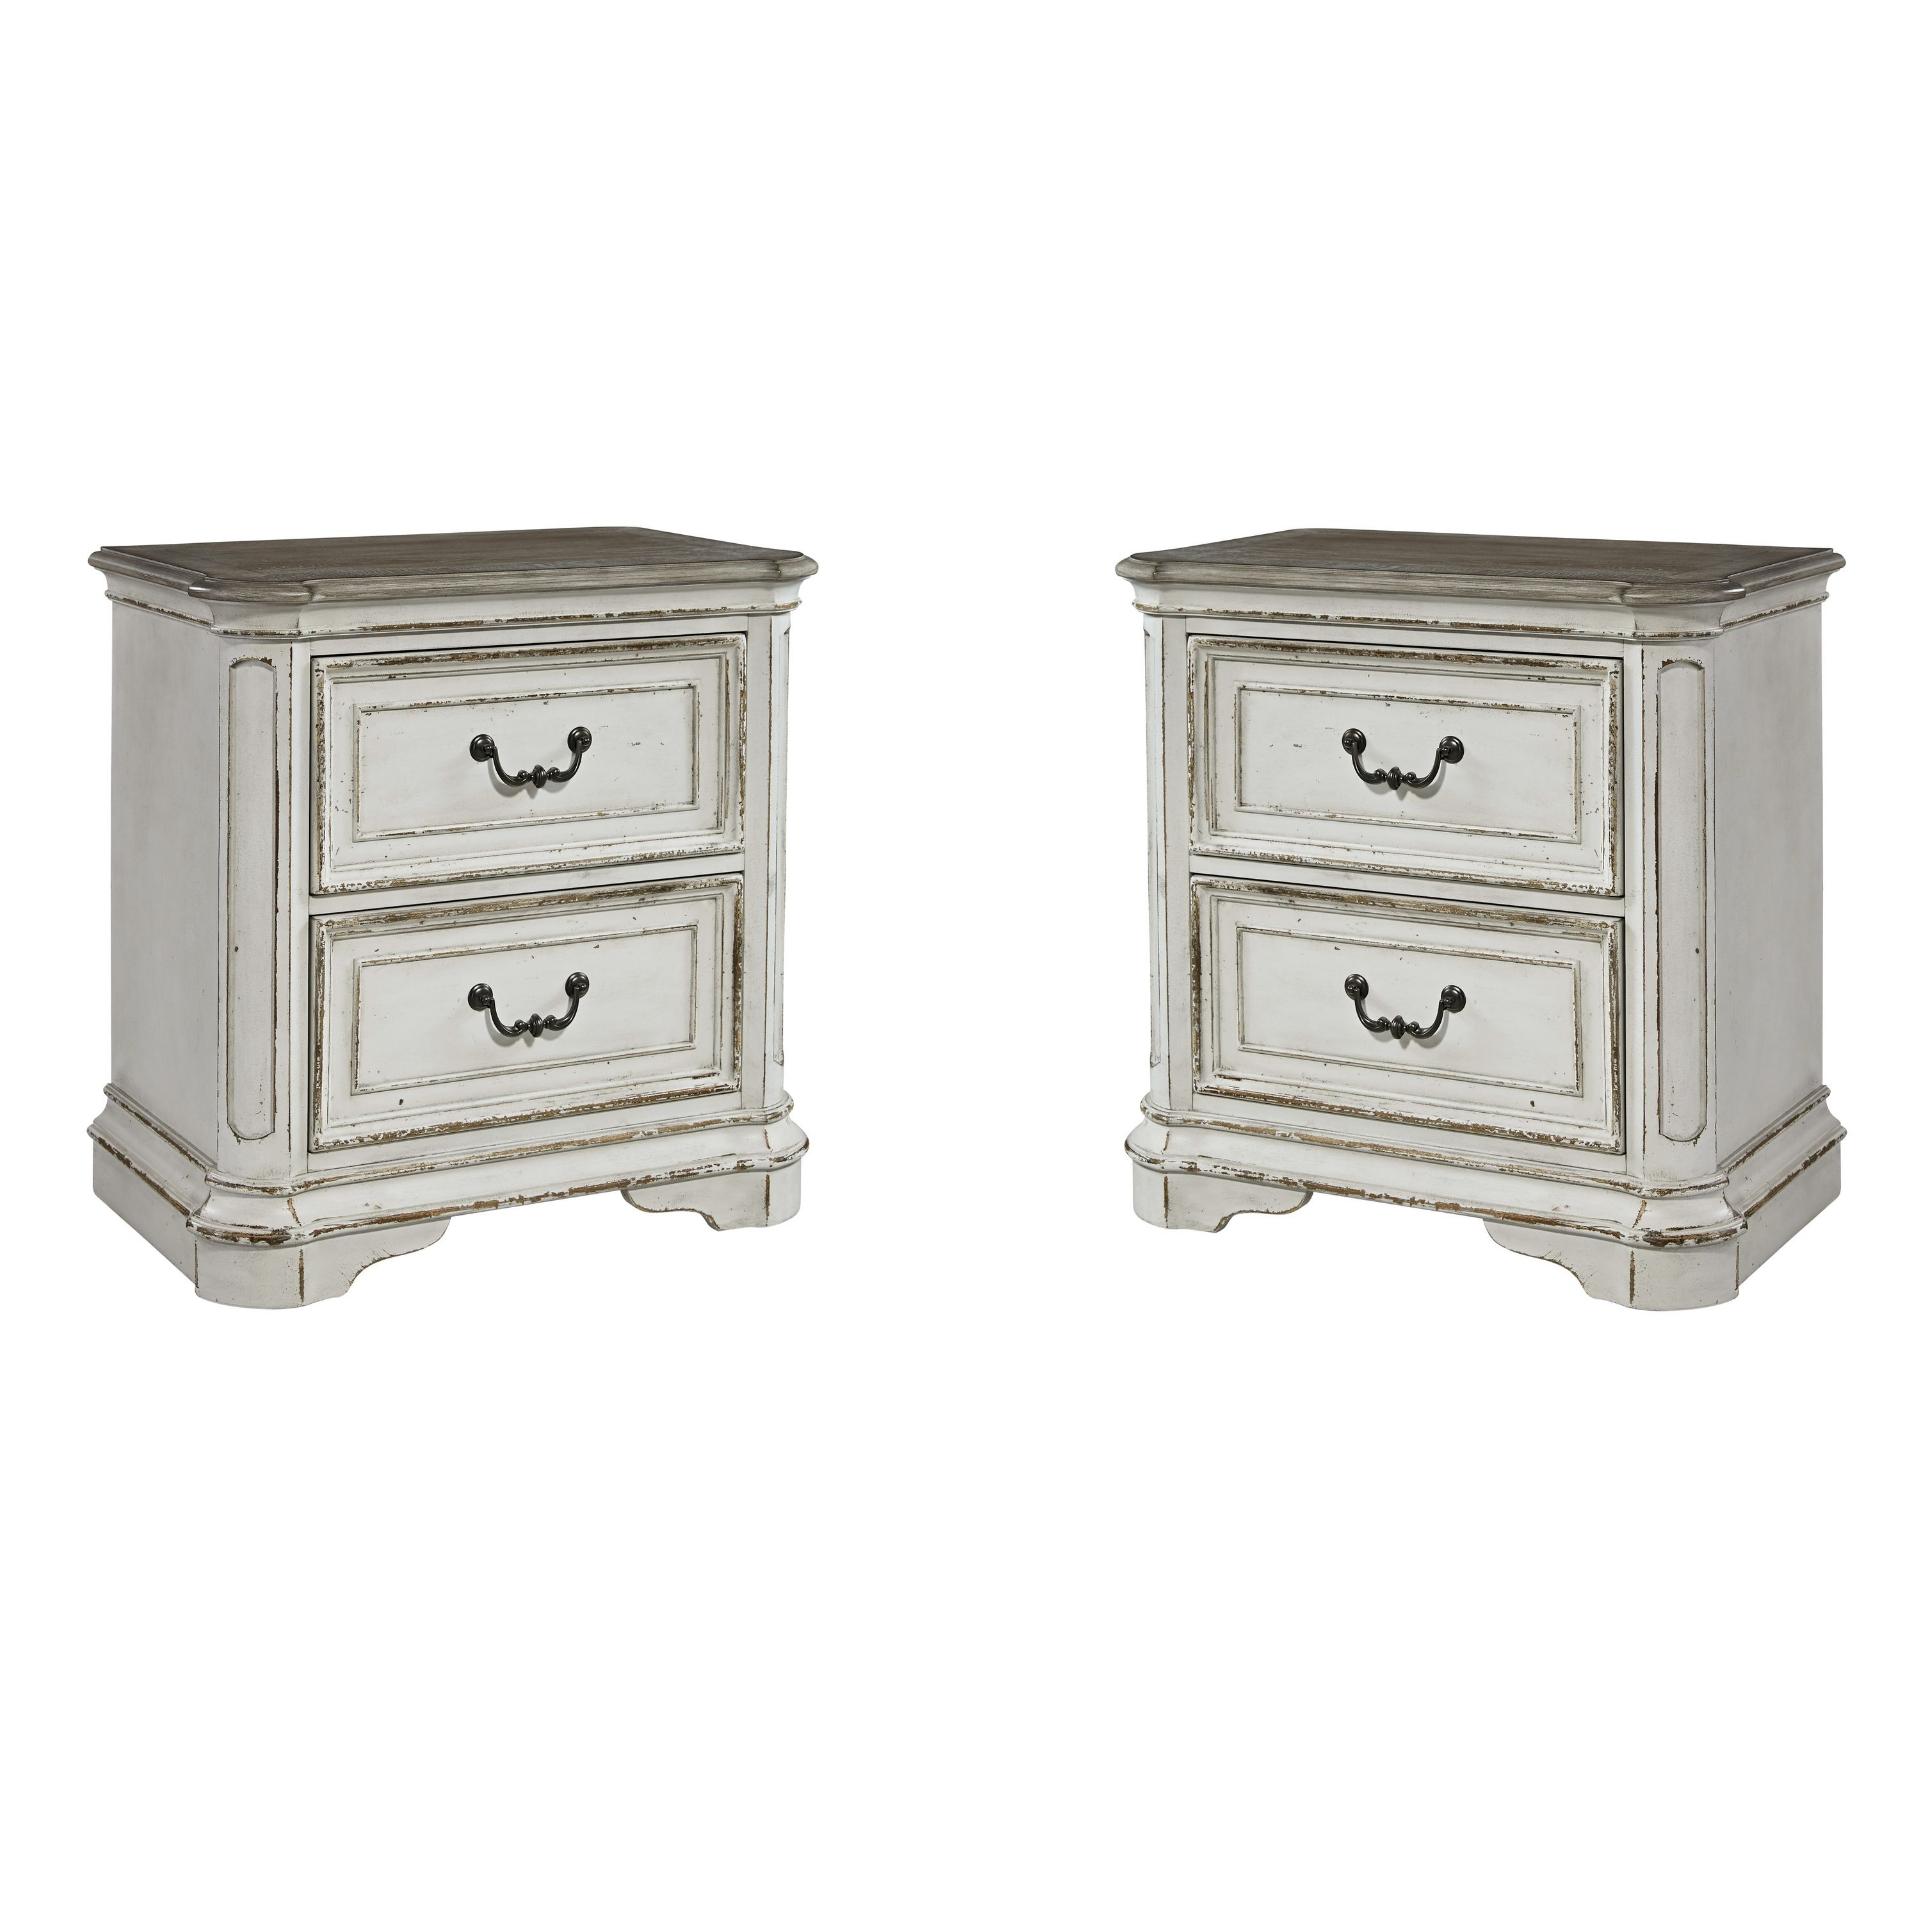 European Traditional Nightstand Set Magnolia Manor  (244-BR) 244-BR61-Set-2 in White 